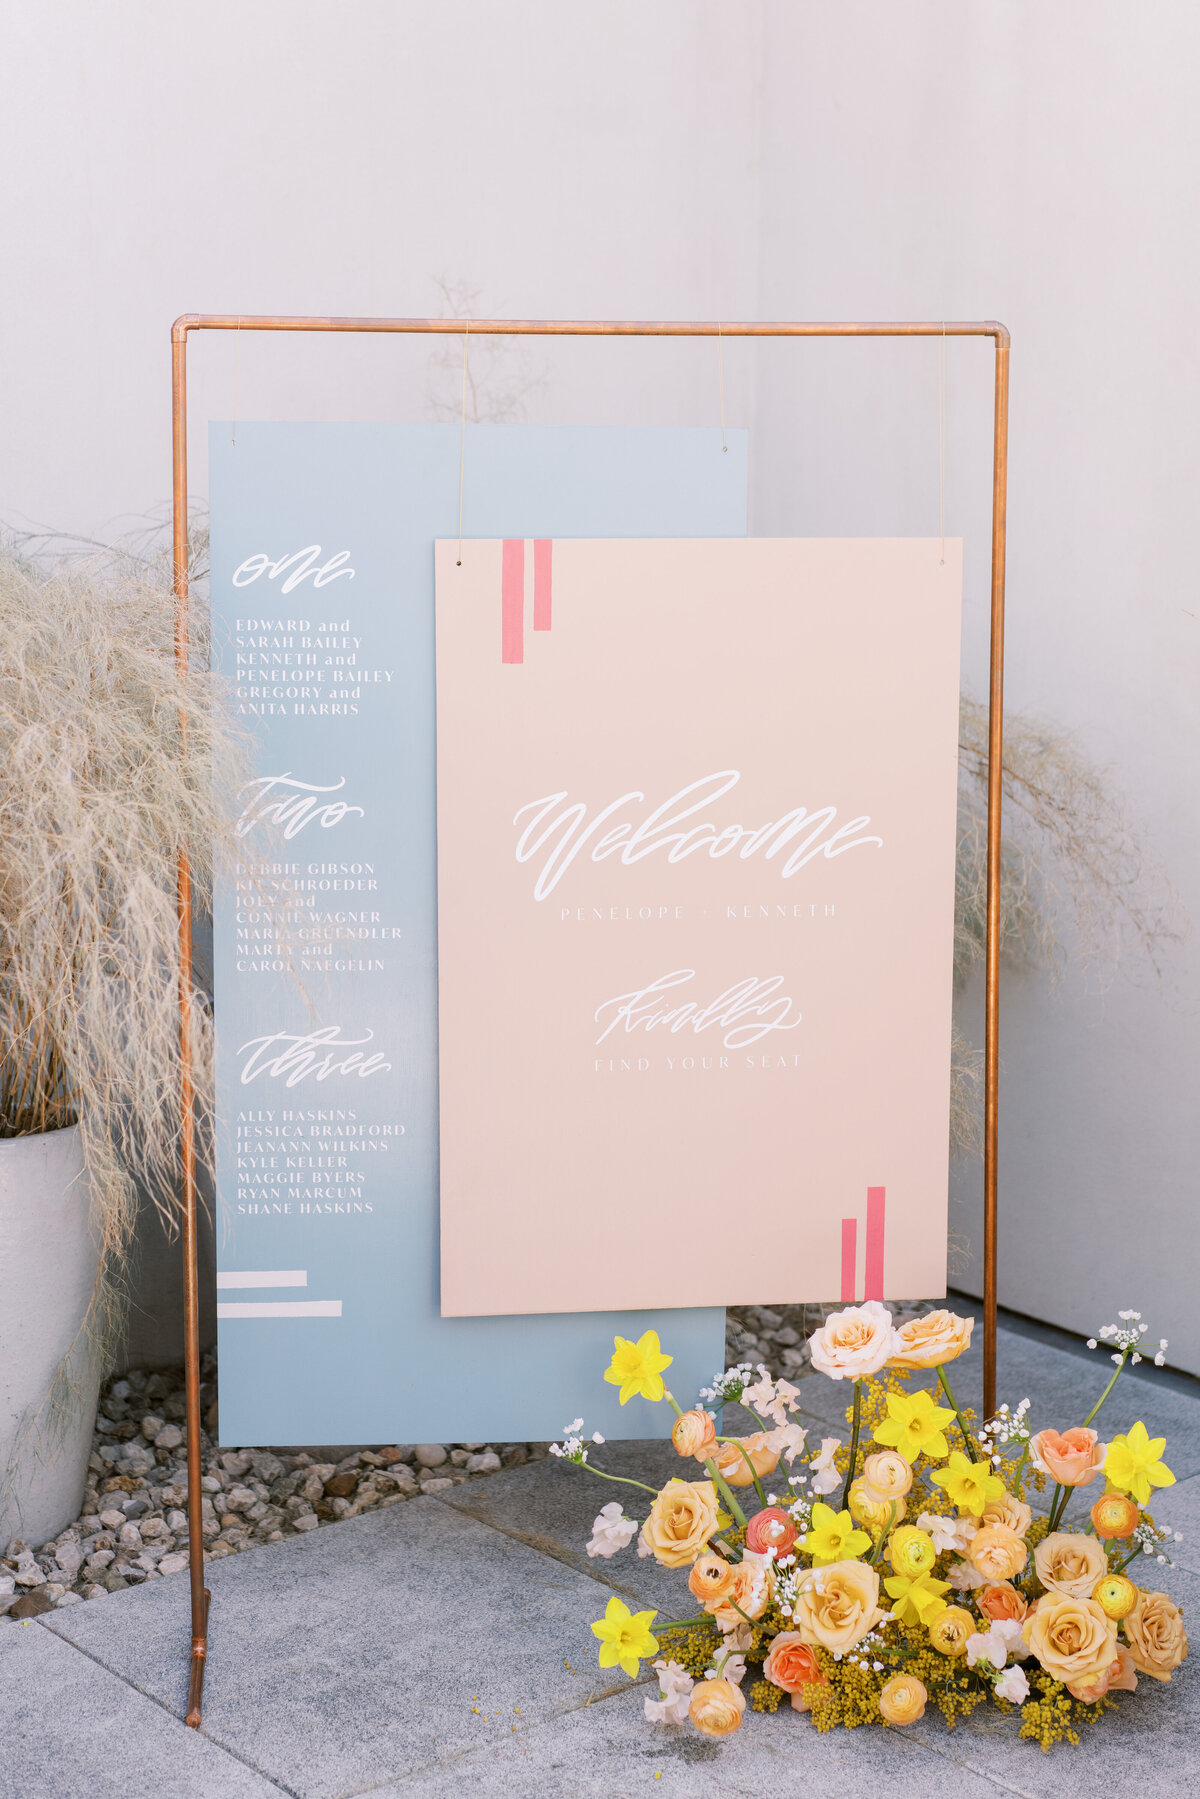 LBV Design House Wedding Design Planning Day-Of Signage Paper Goods Shoppable Accessories Wedding Day Austin, Texas beyond Valerie Strenk Lettered by Valerie Hand Lettering11